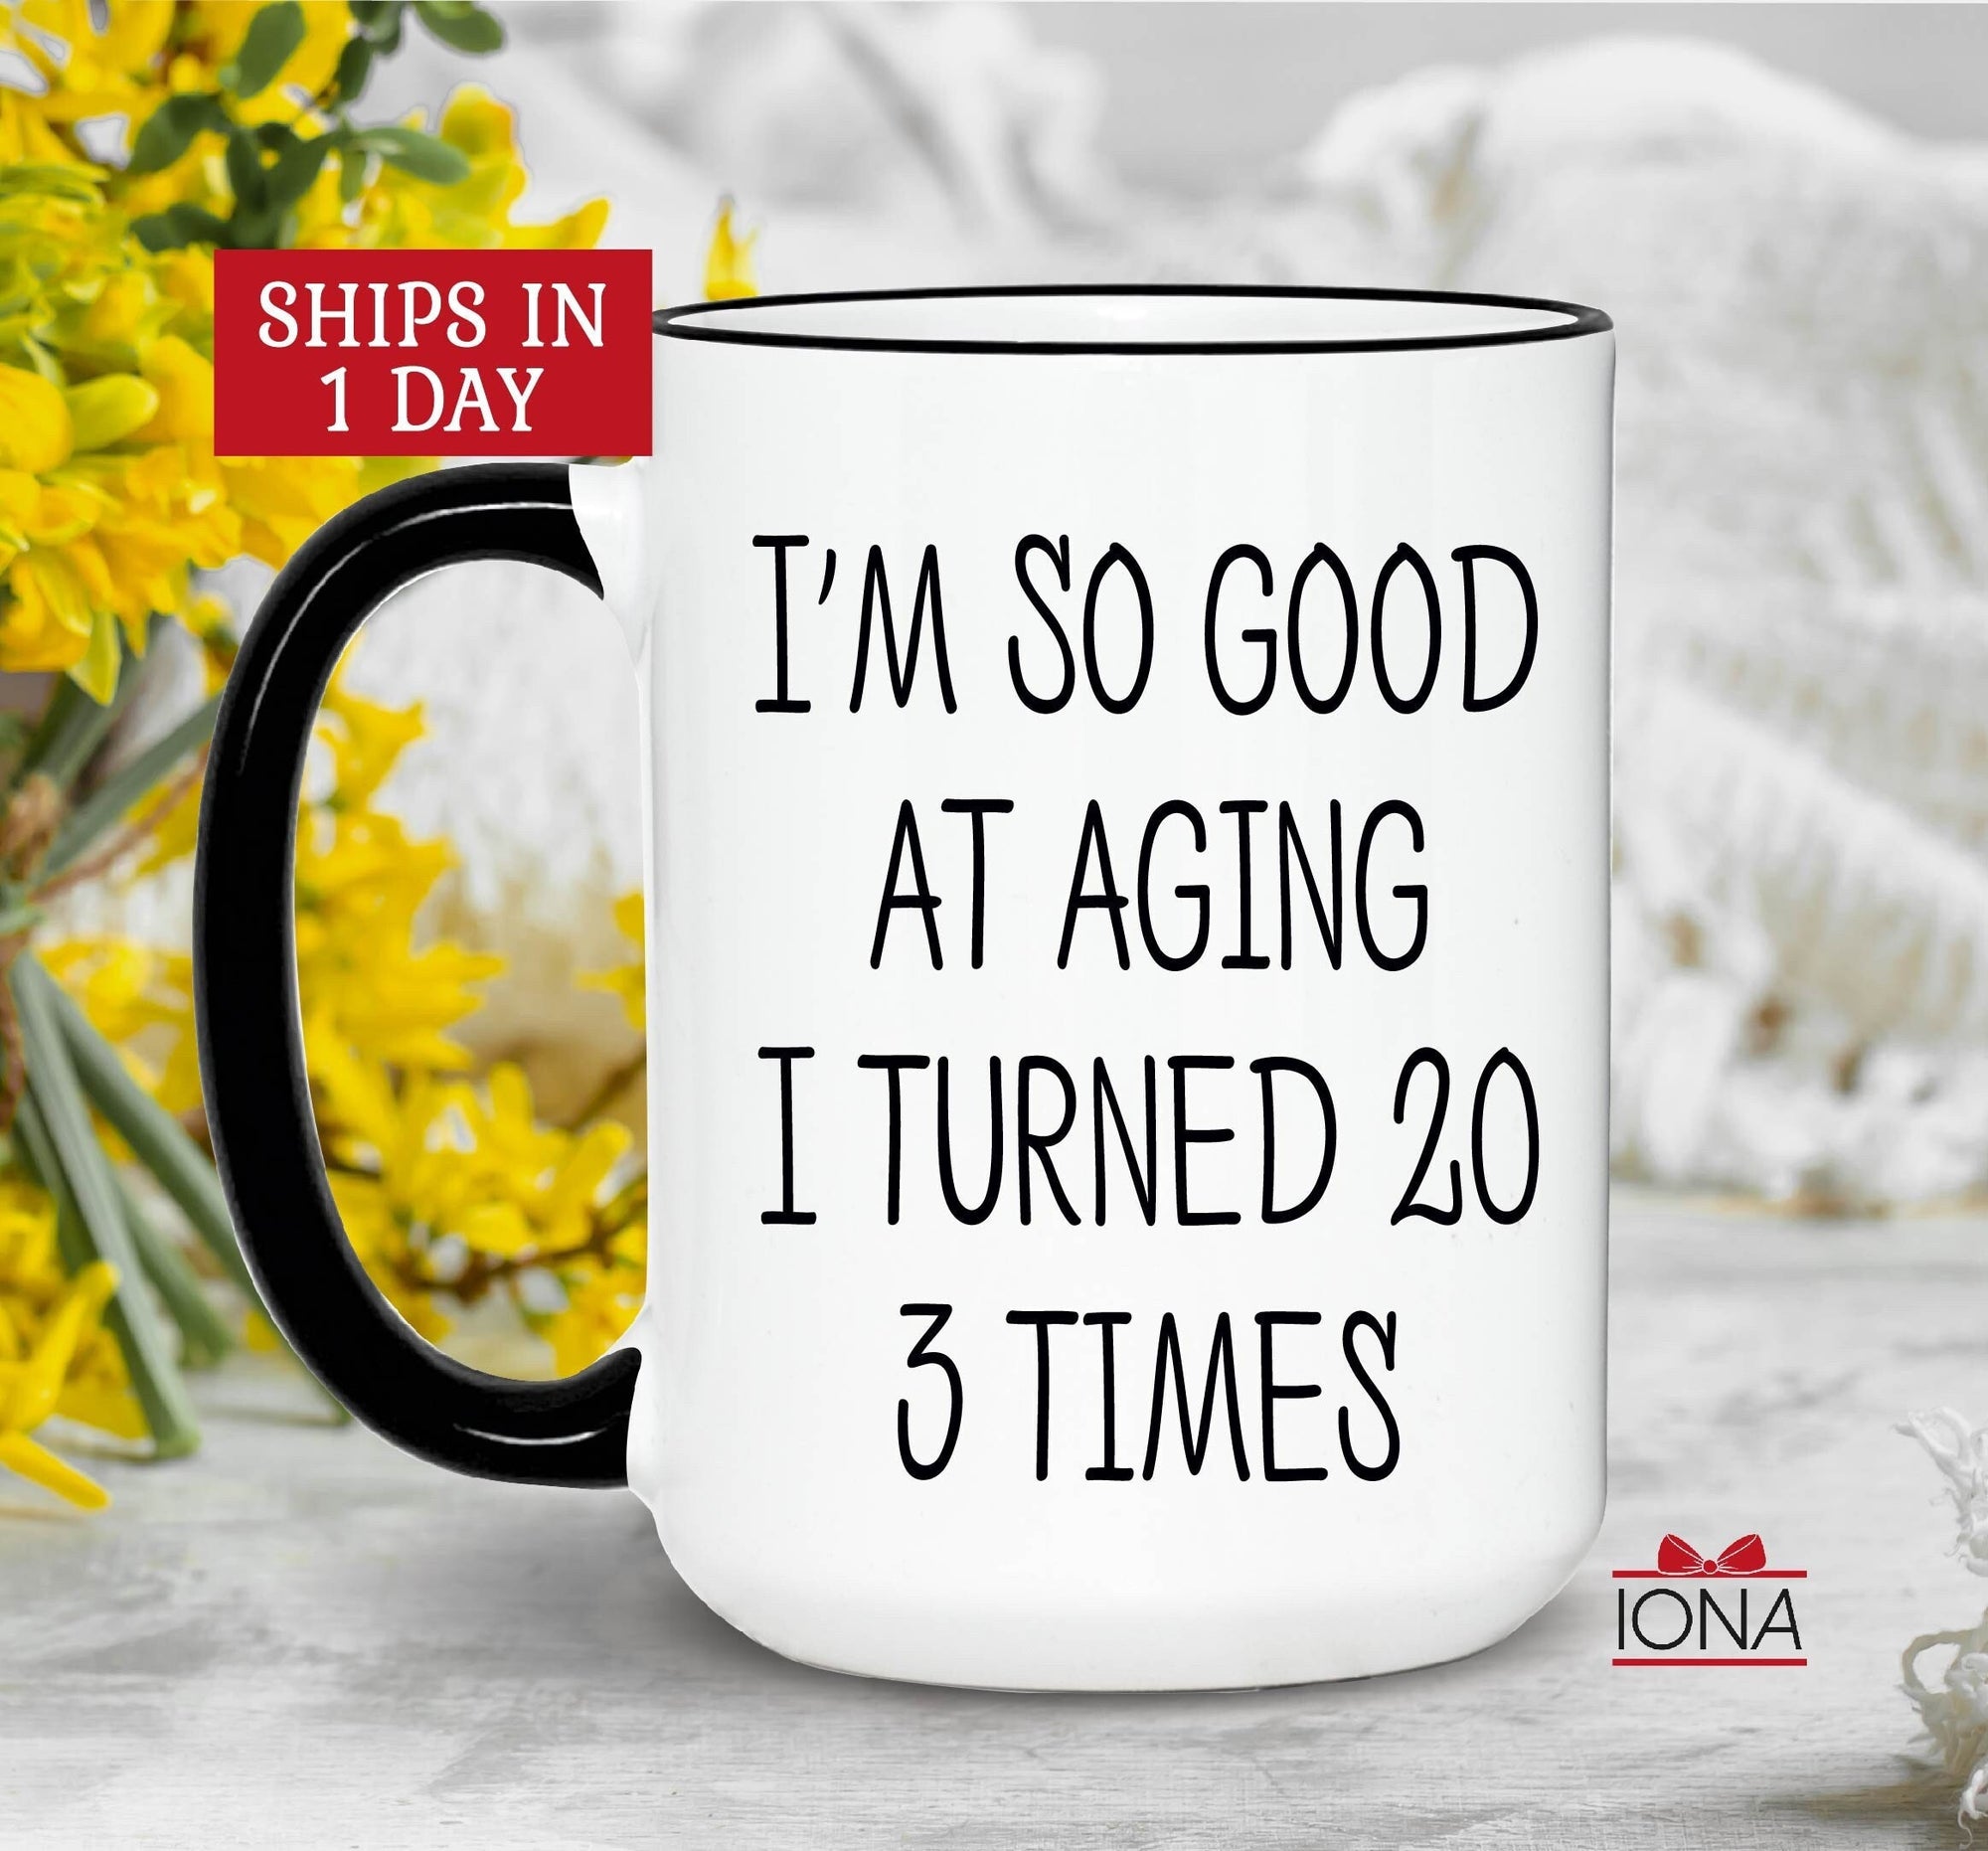 60th Birthday Gift, Sixty Birthday Coffee Mug, 60th birthday gifts for women, Best Friends 60th Gifts, Funny 60th Bday Cup for men, Tea Cup